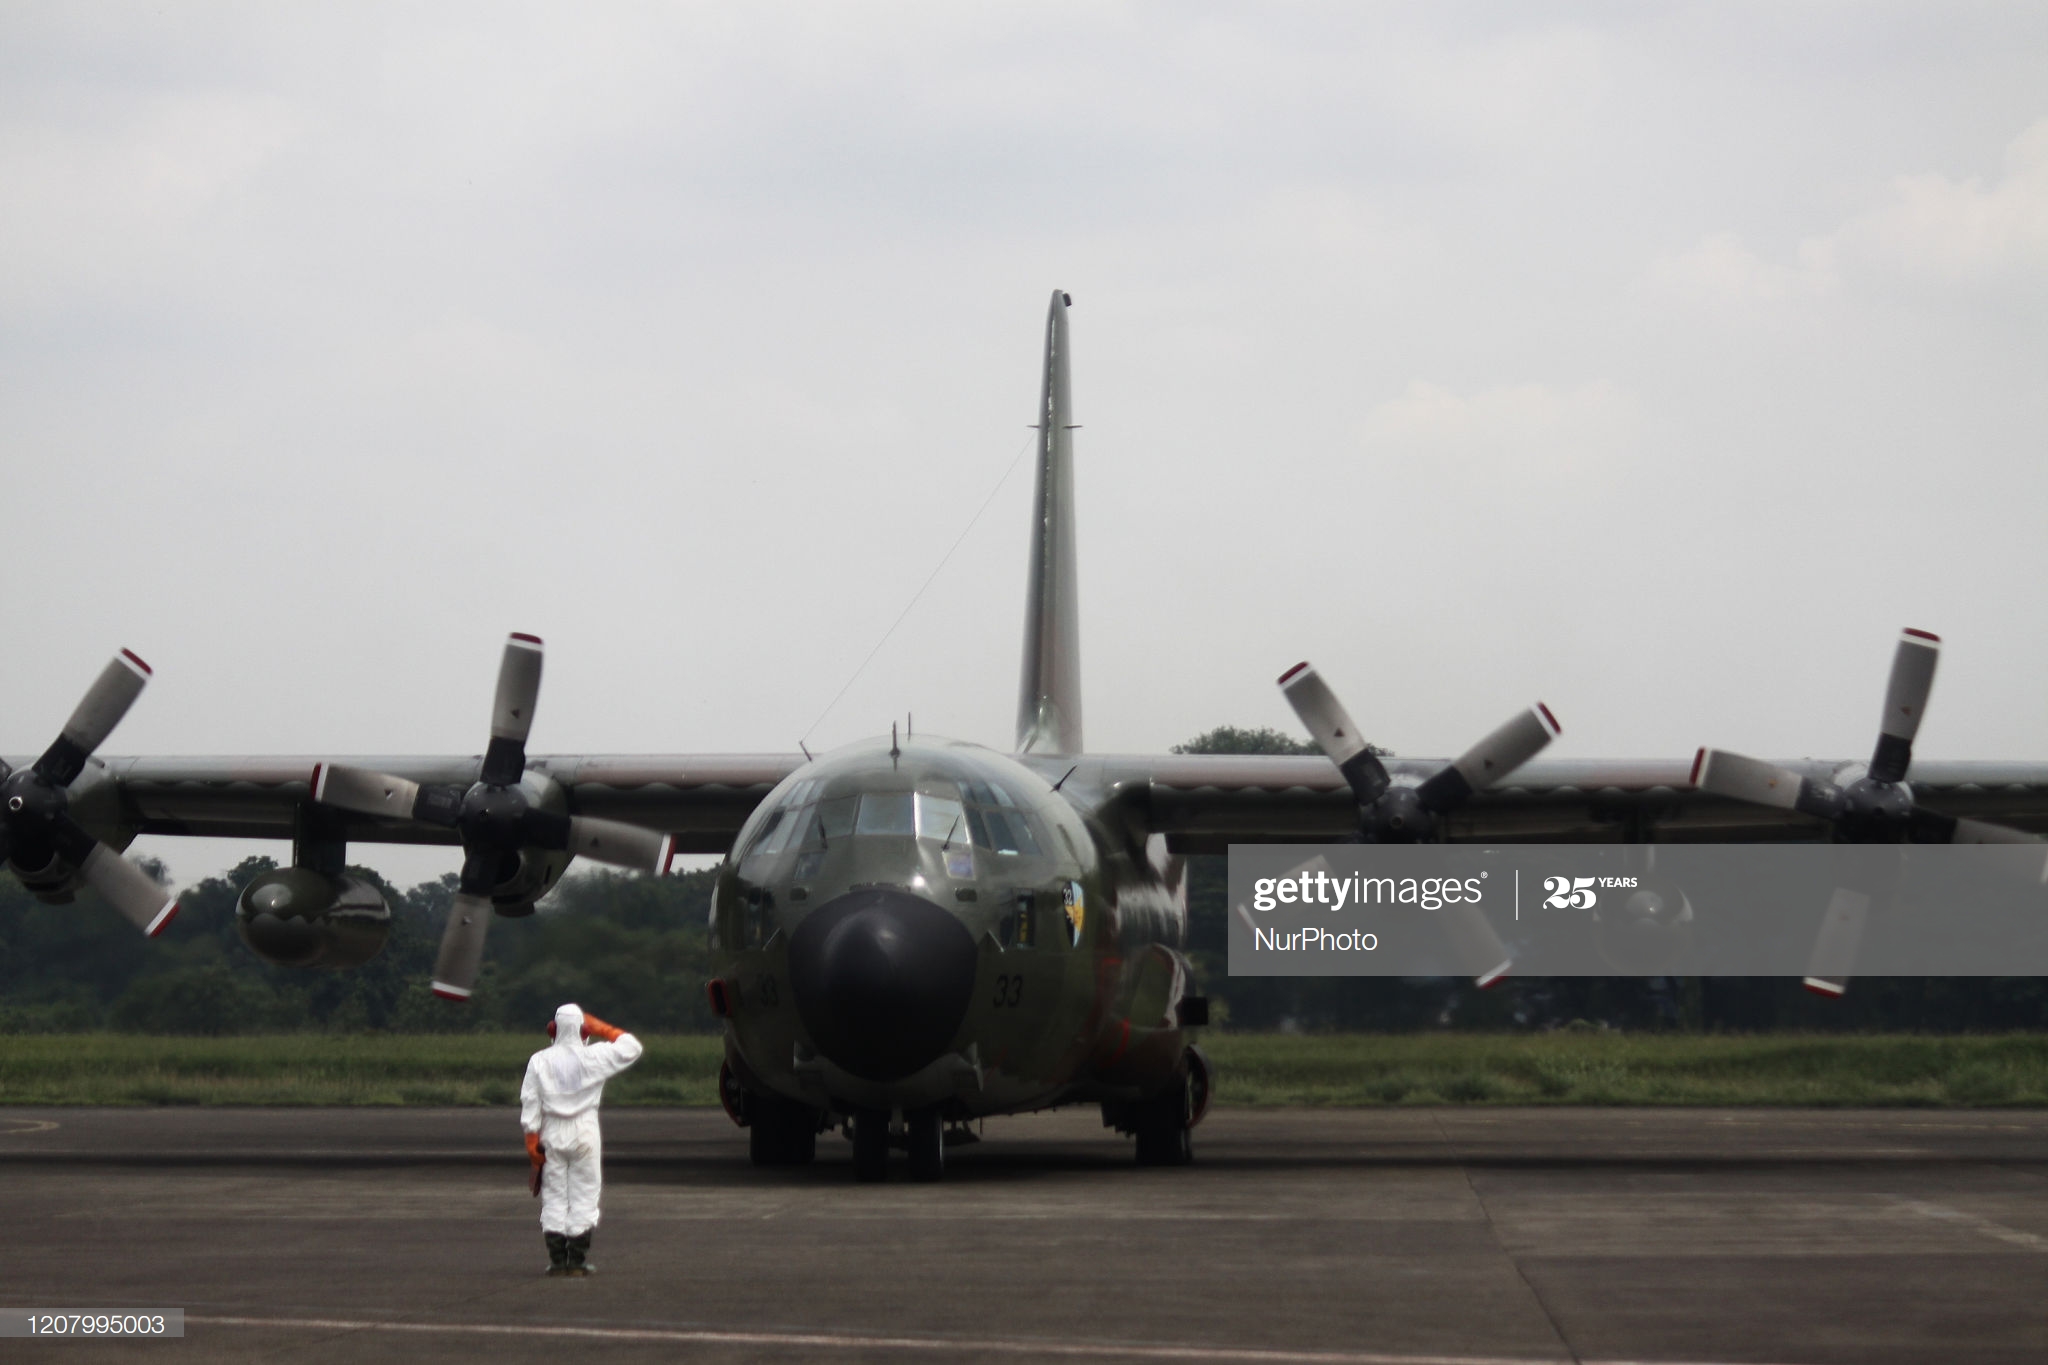 military-aircraft-of-indonesian-air-force-which-carrying-9-tons-of-picture-id1207995003